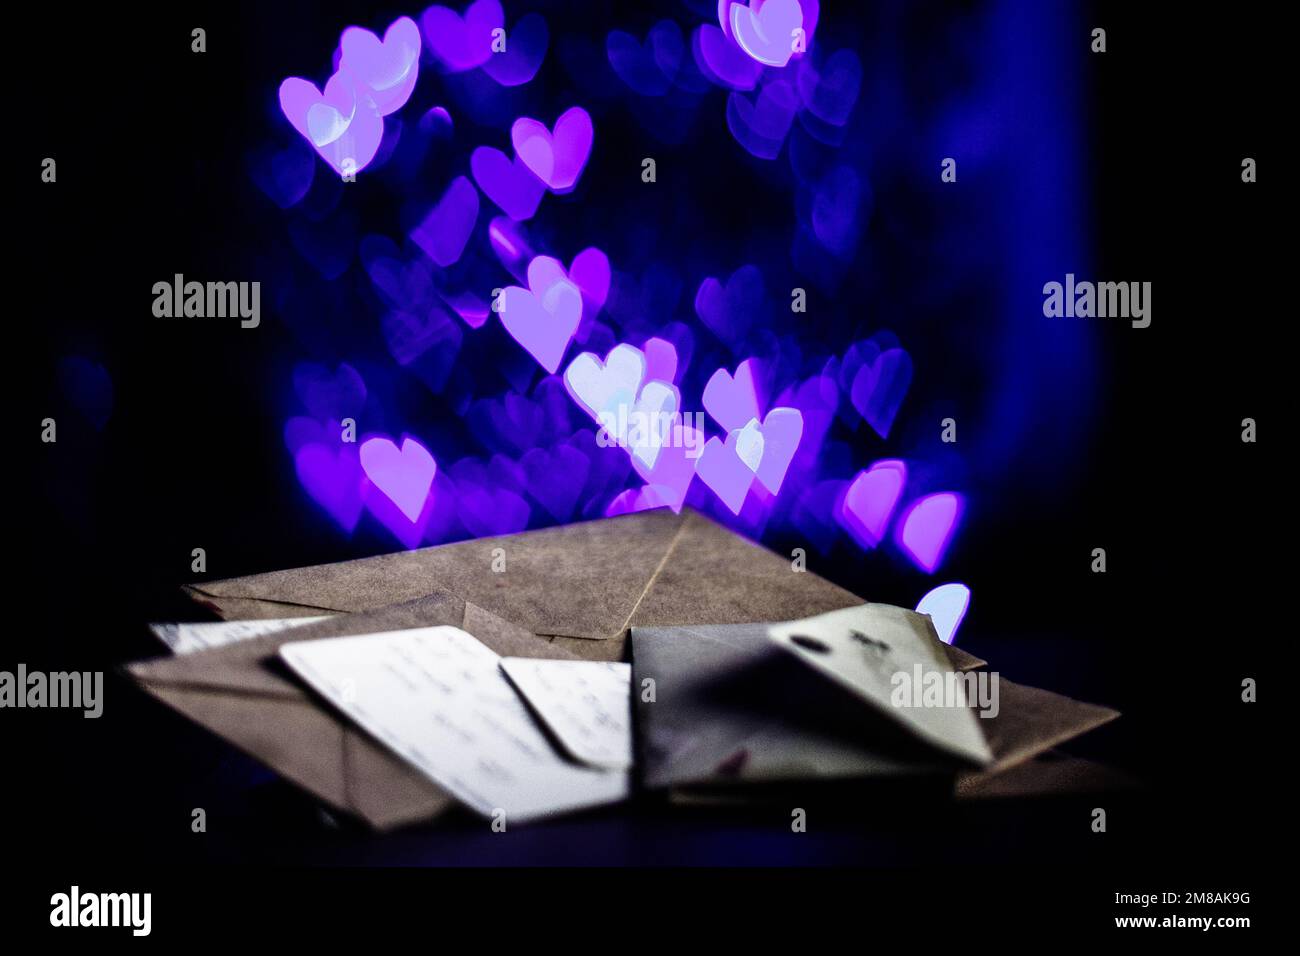 Valentines day letters, cards, glowing purple hearts in the dark Stock Photo